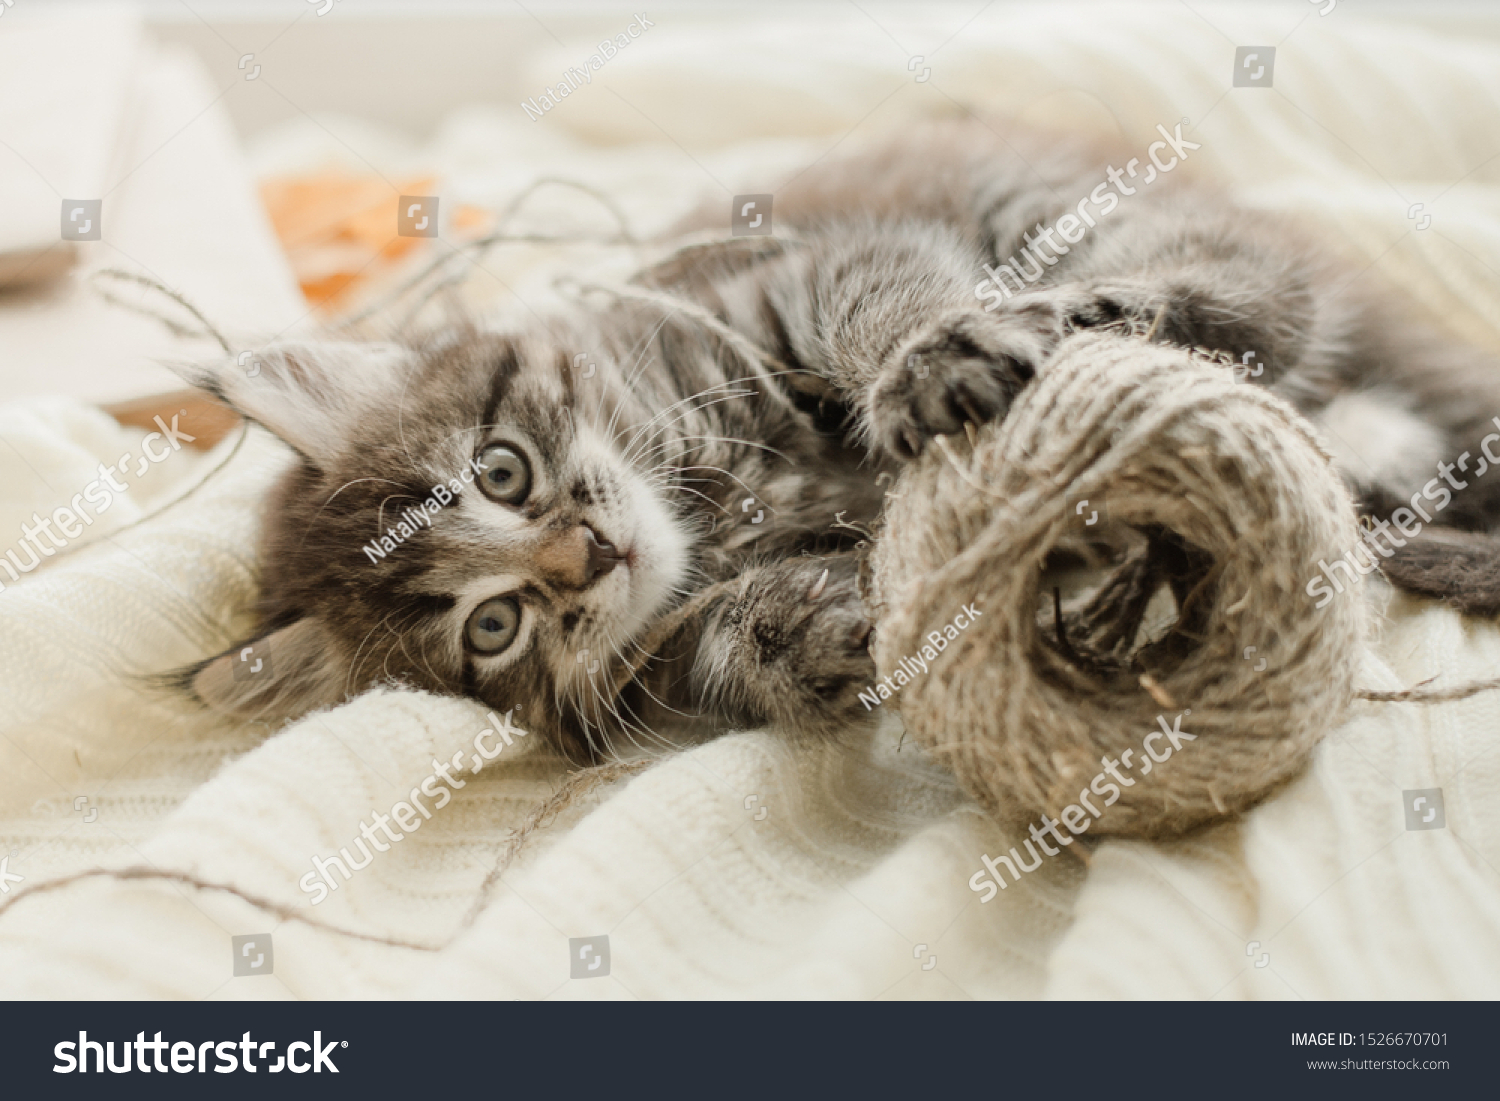 little cute gray kitten plays on a white plaid by the window #1526670701